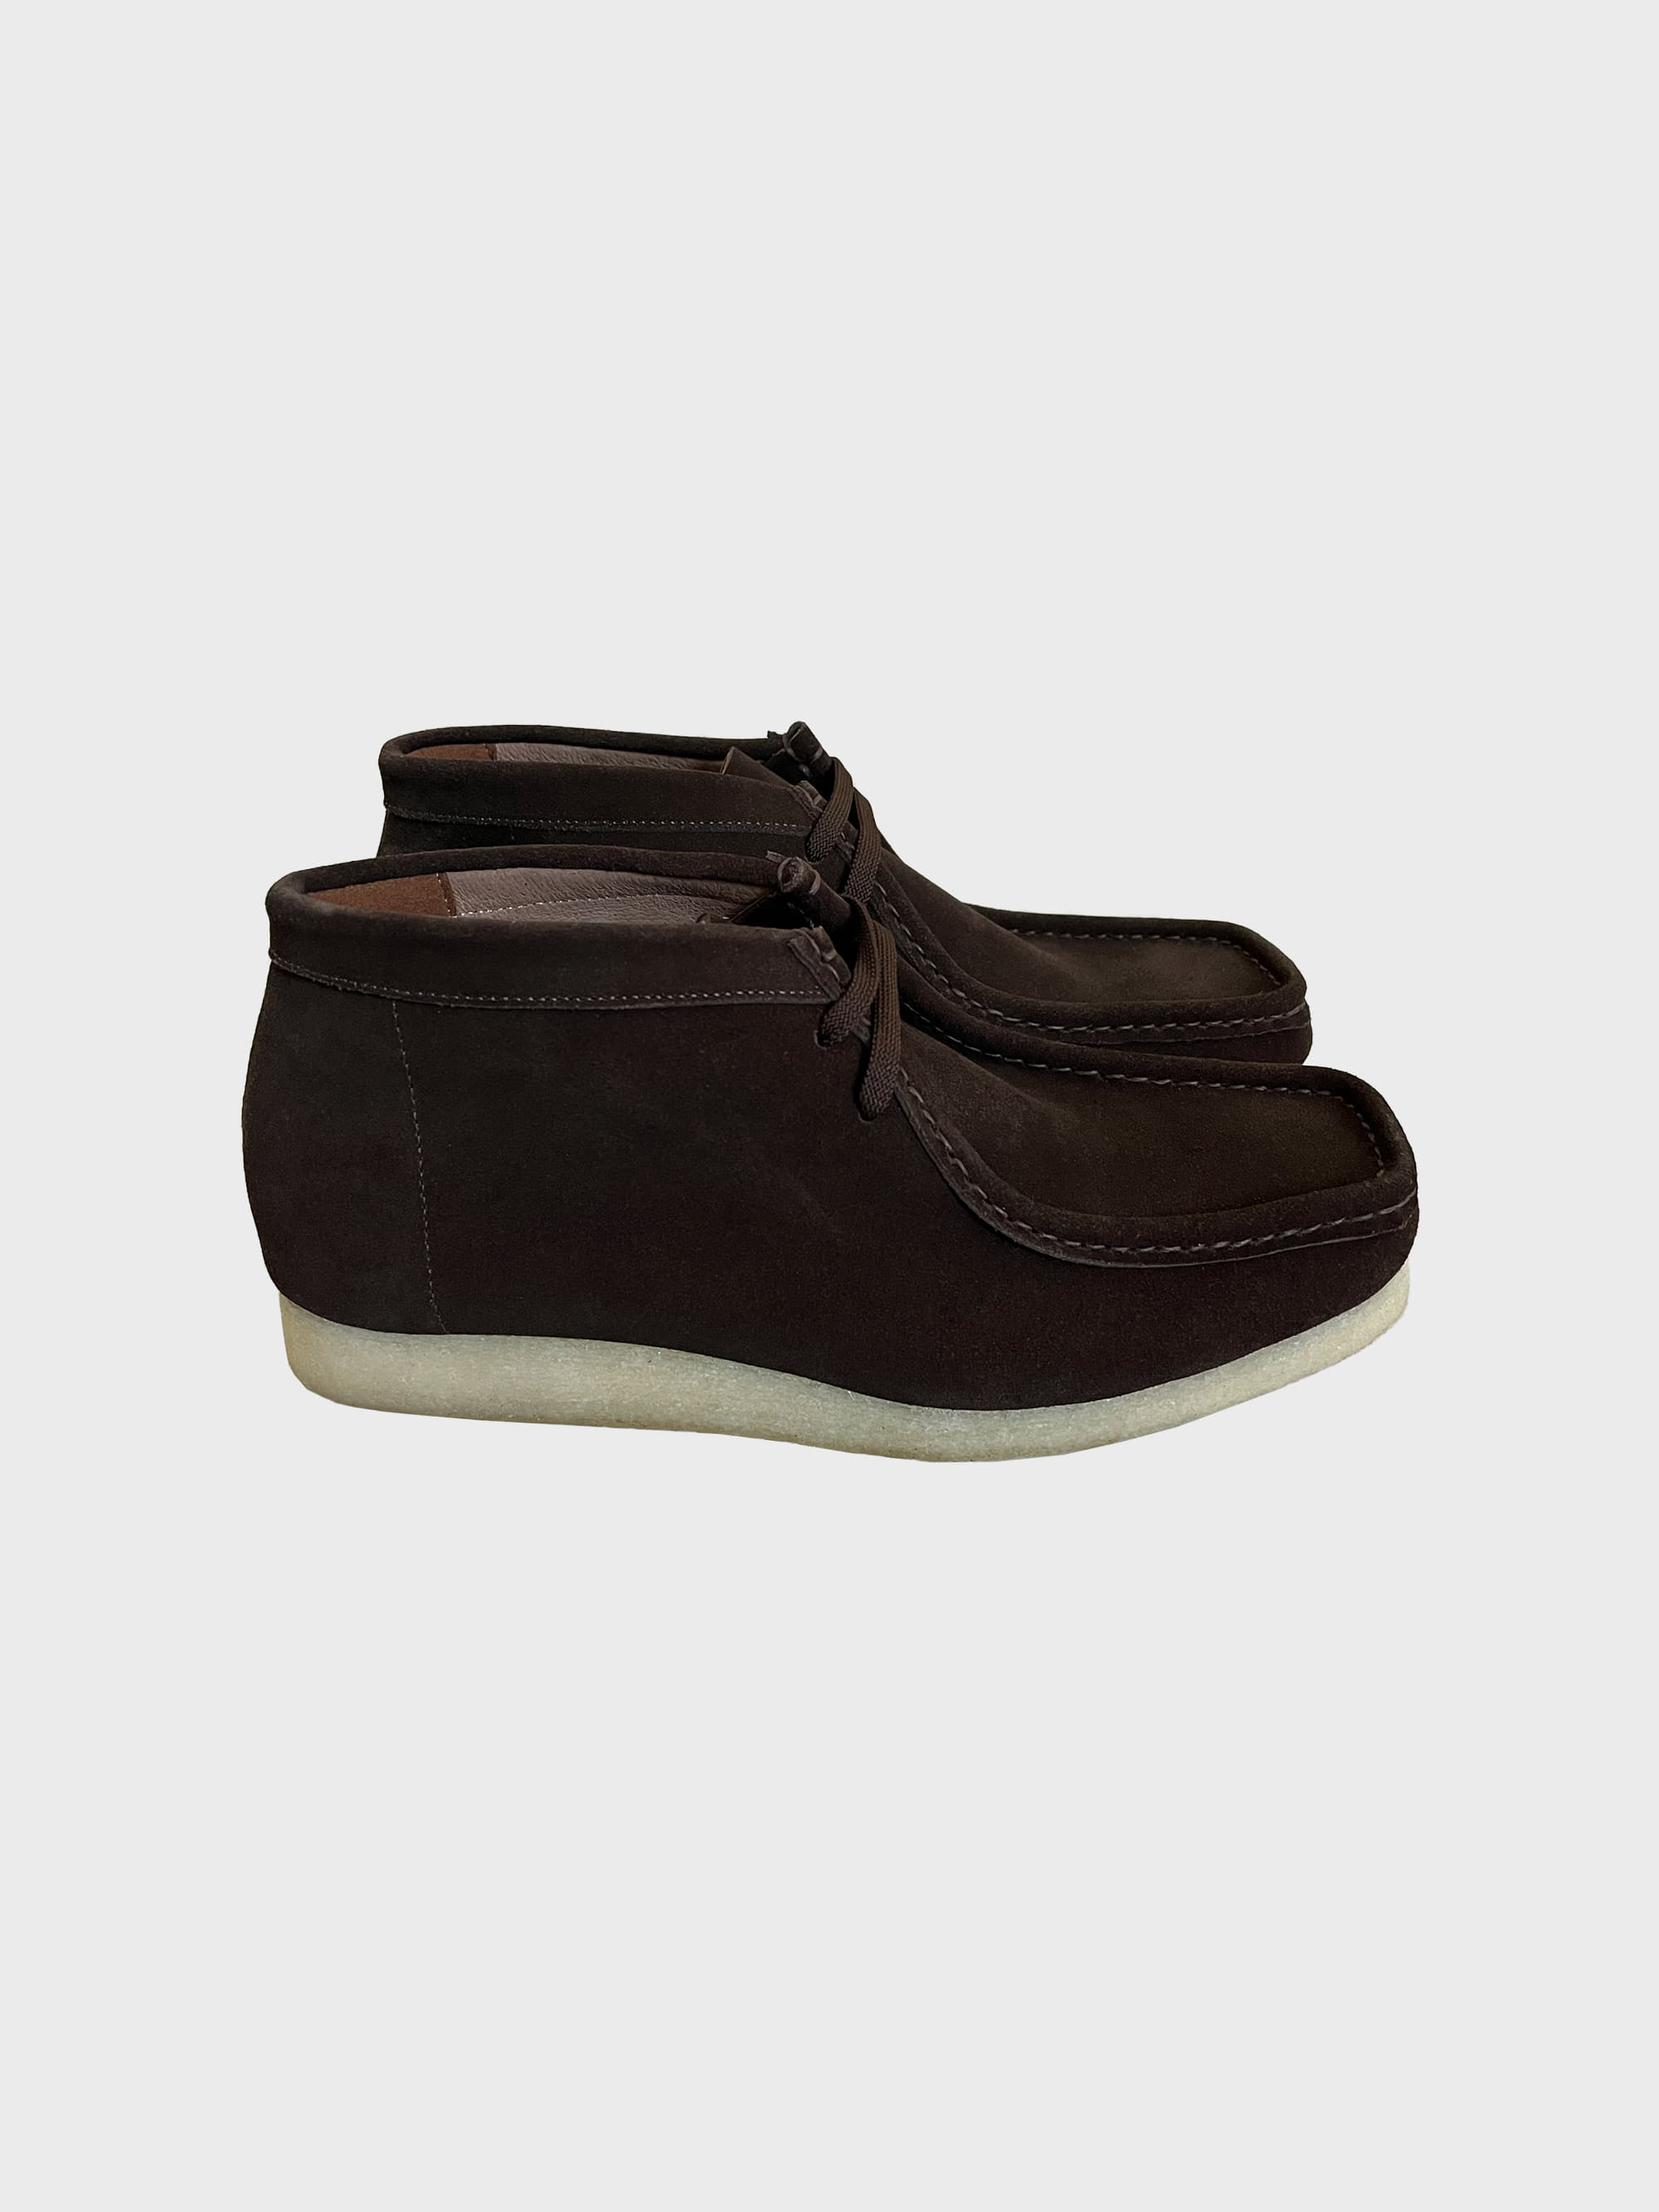 Taily suede desert boots (2color)